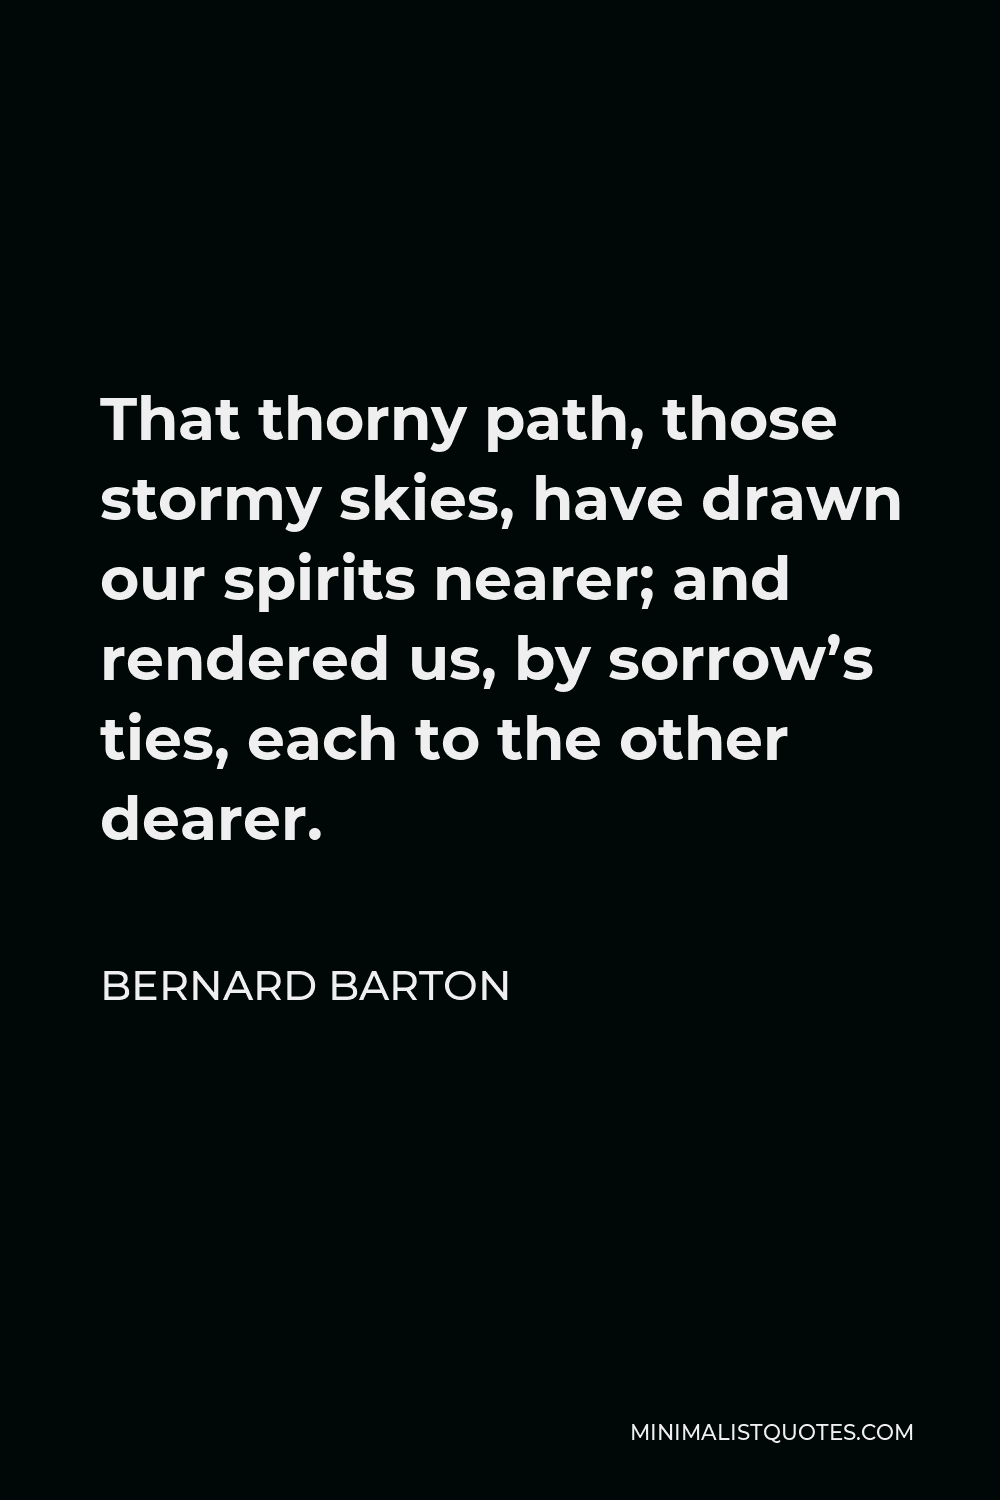 Bernard Barton Quote - That thorny path, those stormy skies, have drawn our spirits nearer; and rendered us, by sorrow’s ties, each to the other dearer.